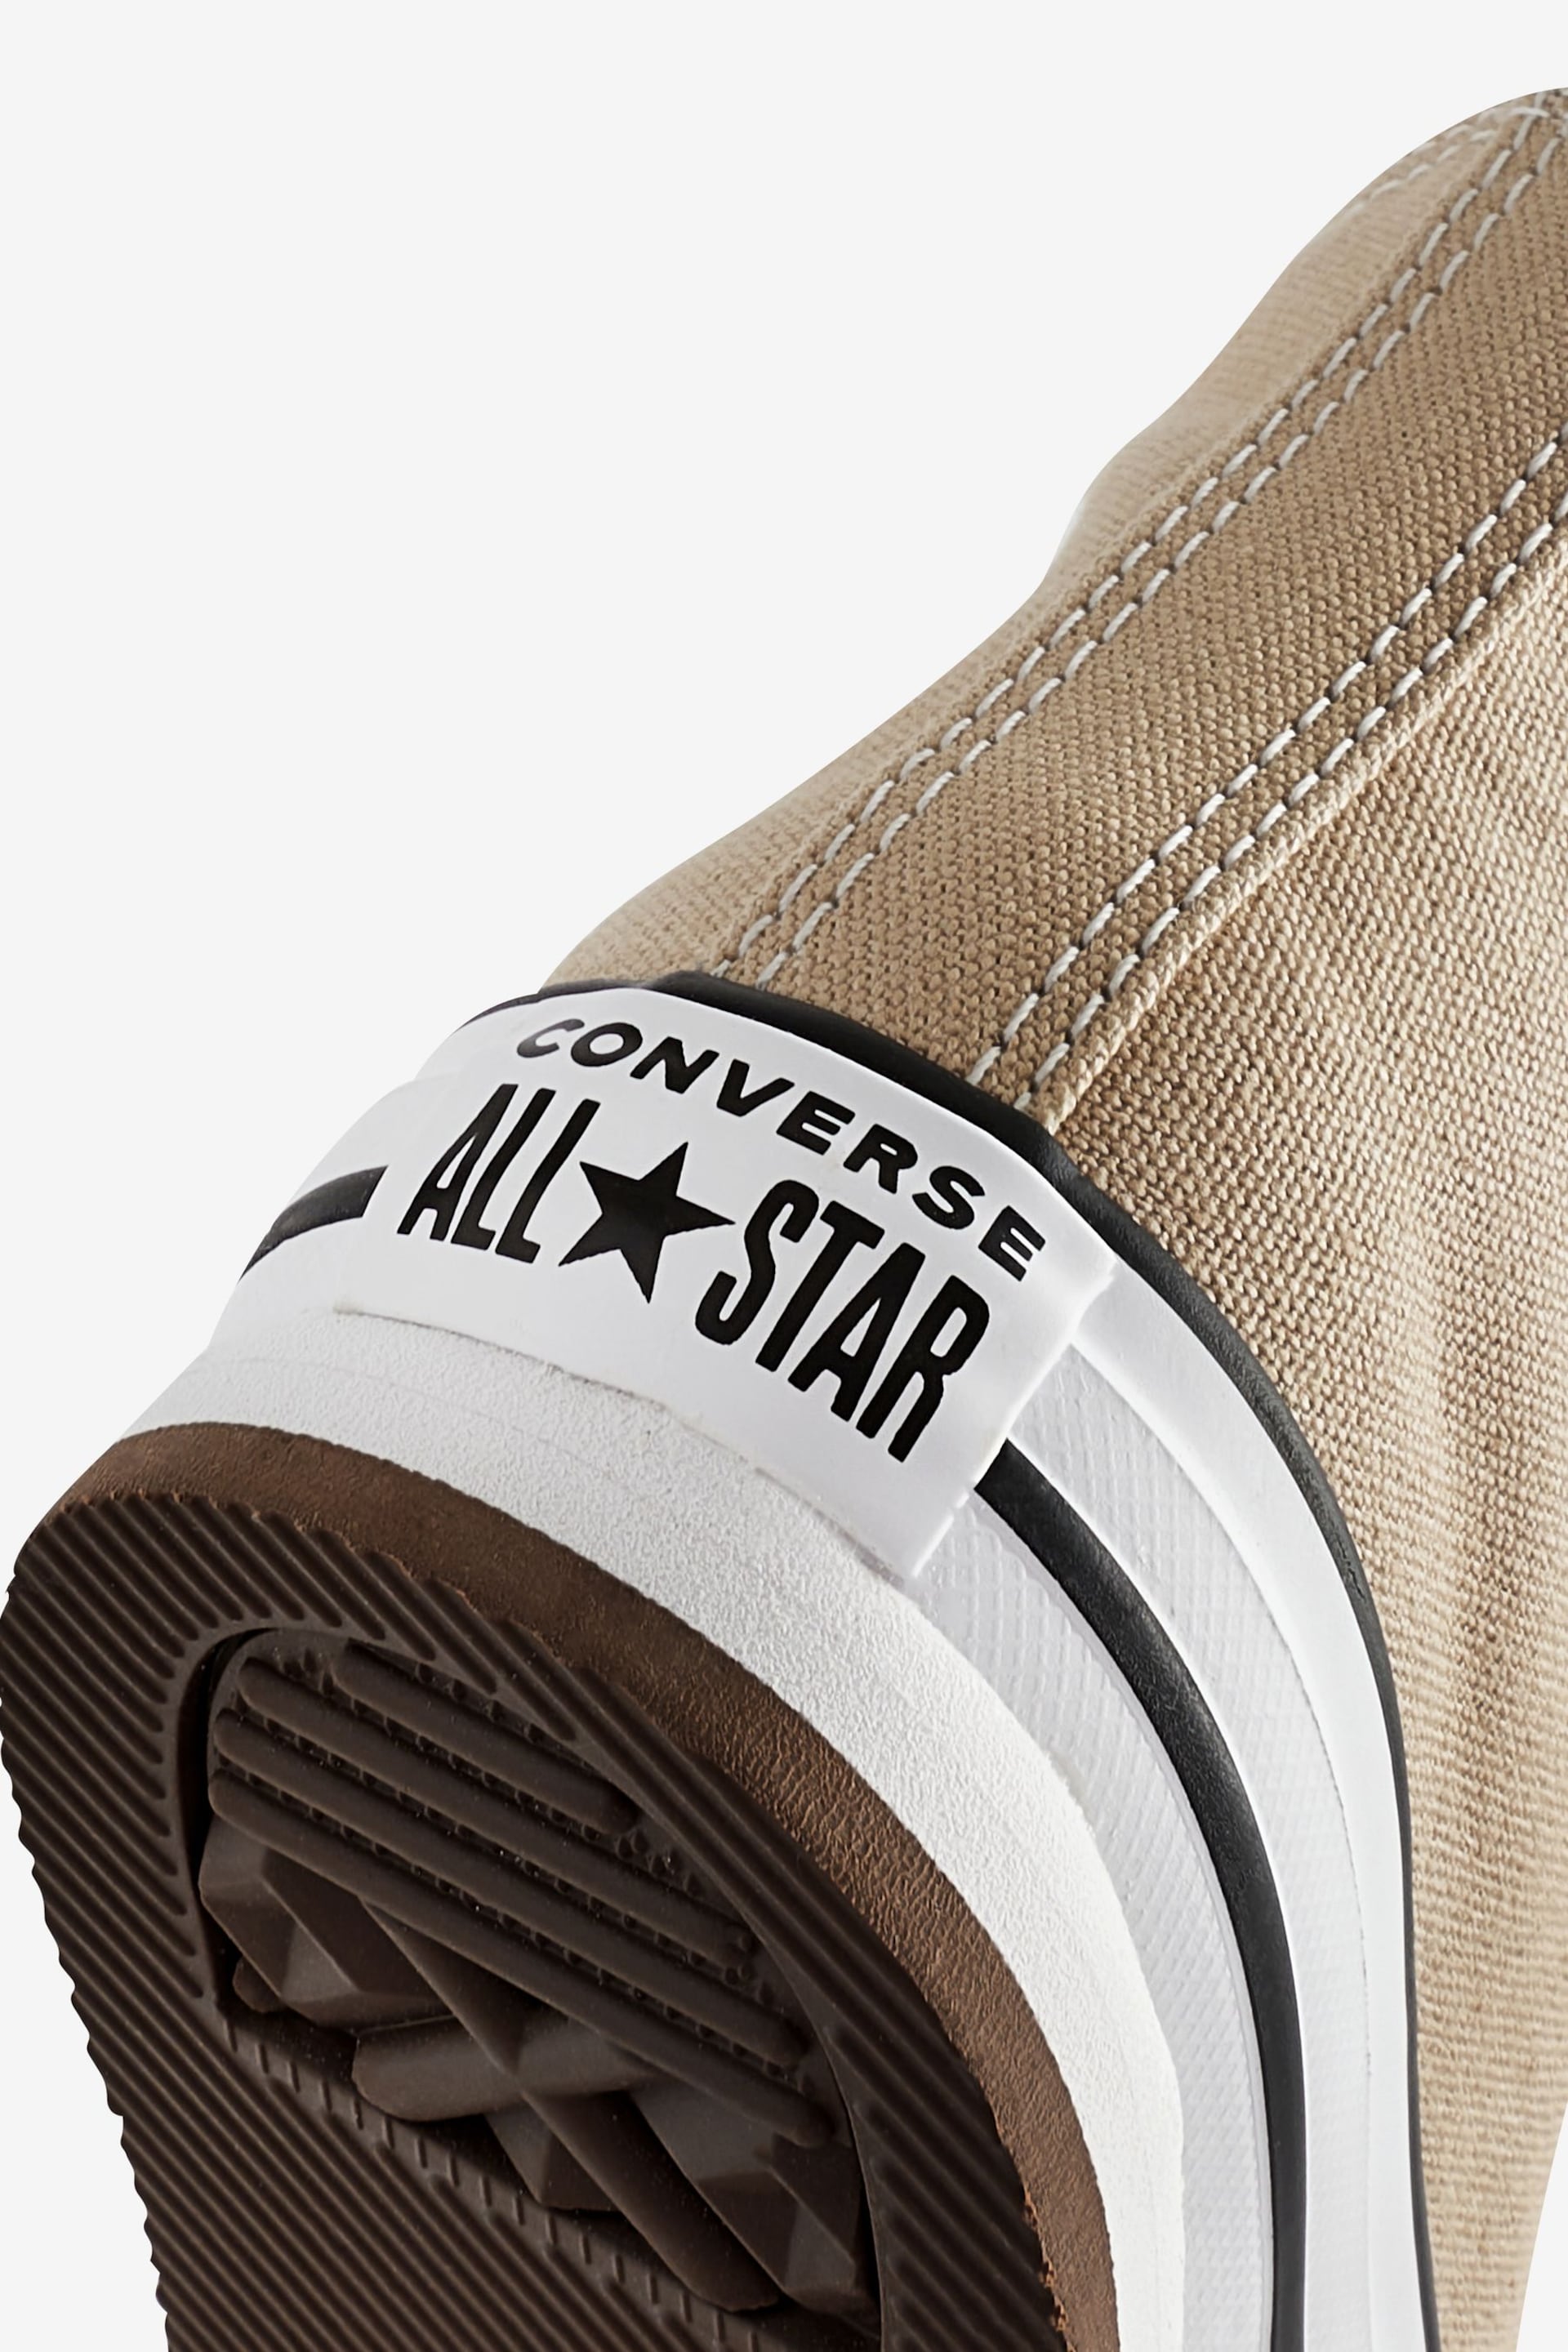 Converse Creame Neutral All Star EVA Lift Junior Trainers - Image 9 of 9